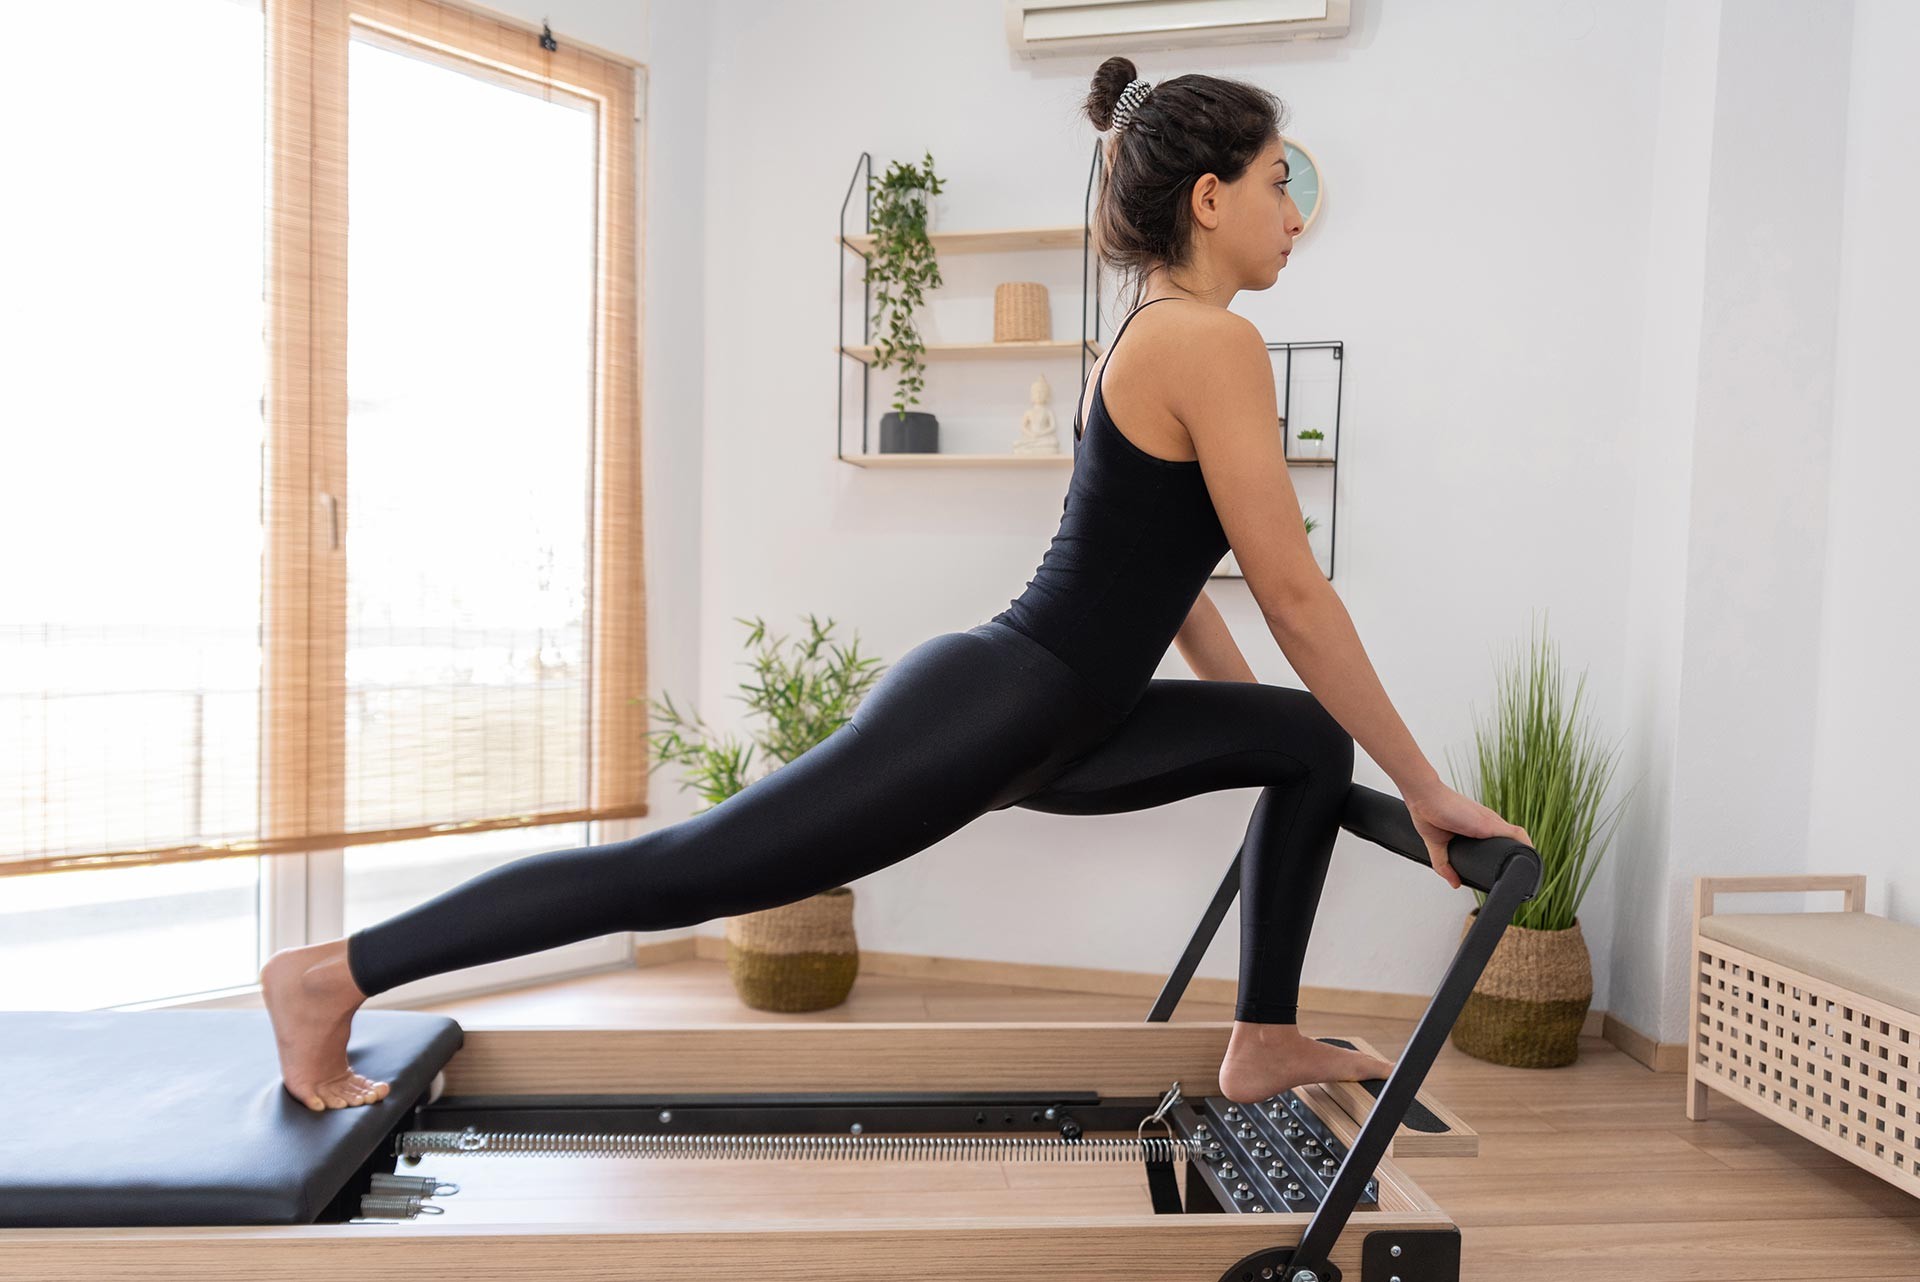 young-woman-exercising-on-pilates-reformer-bed-2021-08-26-15-59-35-utc-(1)